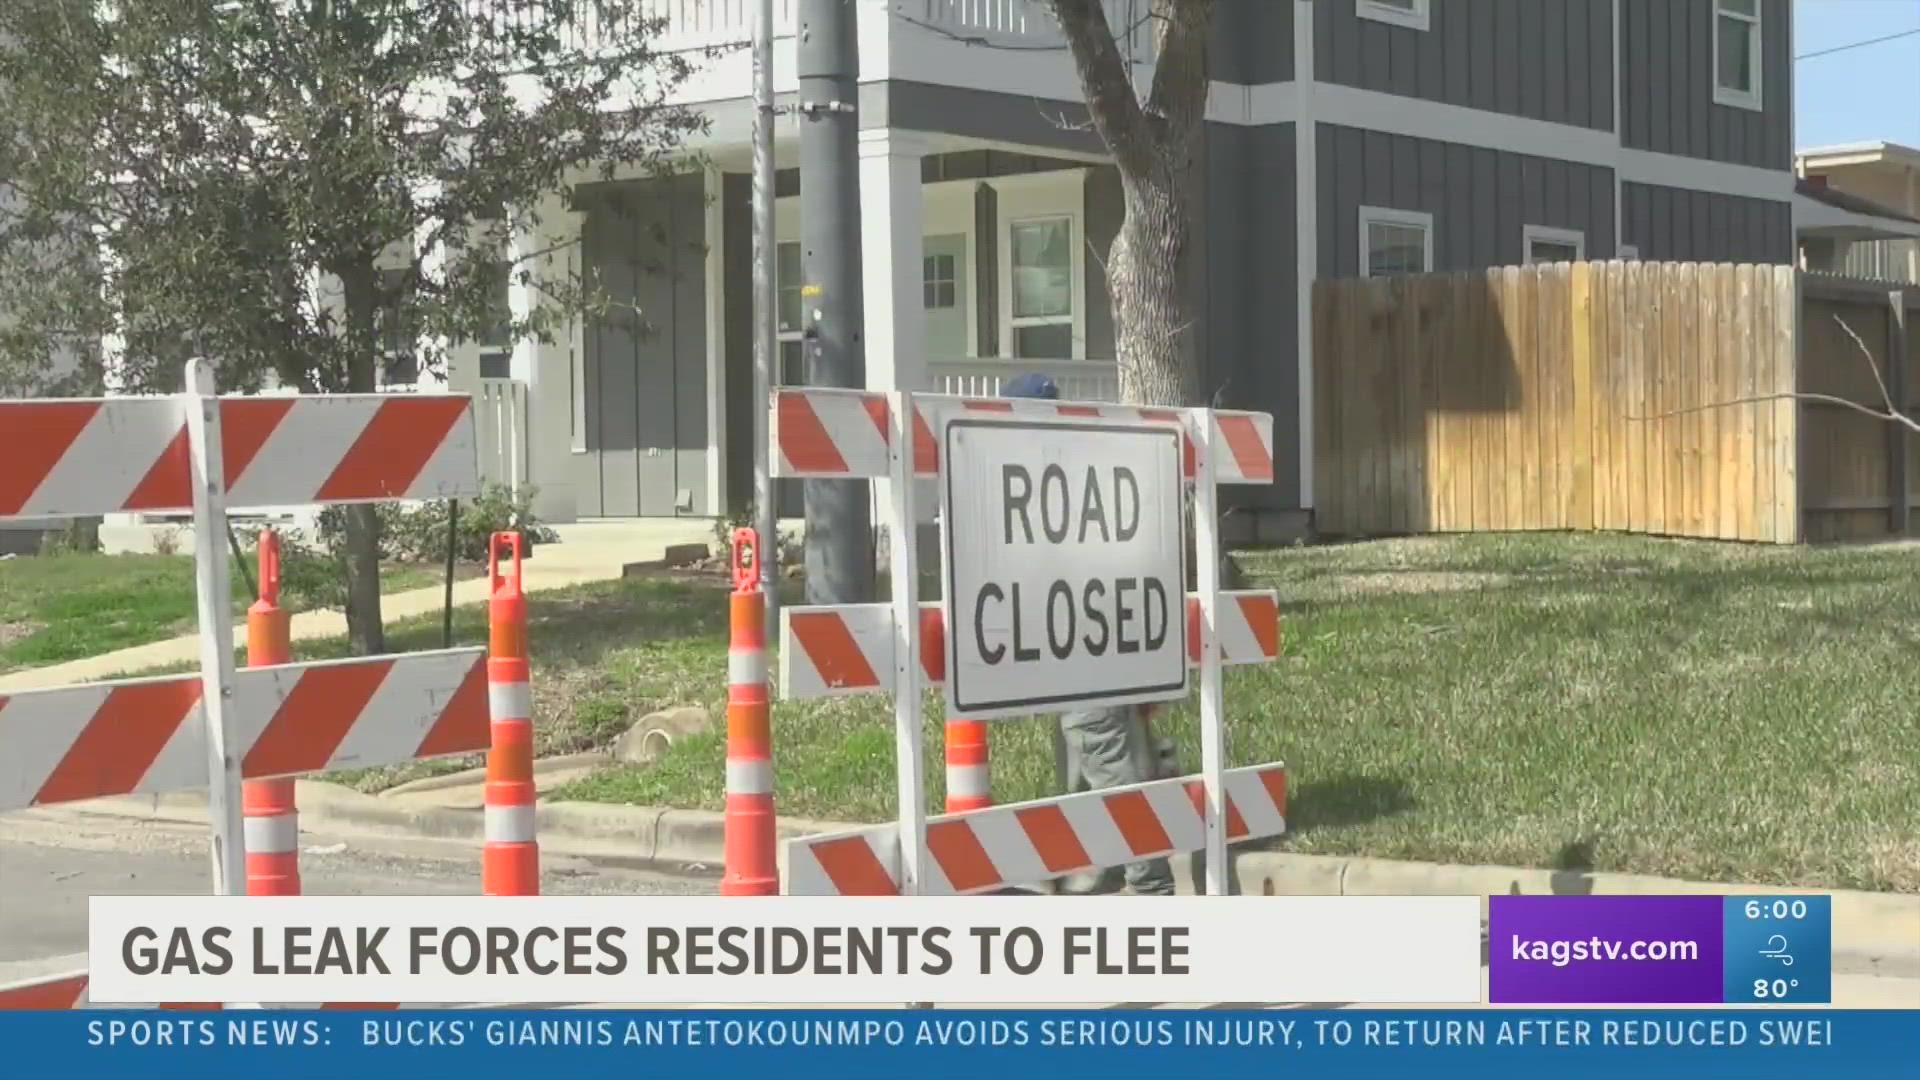 Some residents in the affected area were forced to sleep in their cars due to conflicting forms of communication from College Station officials.